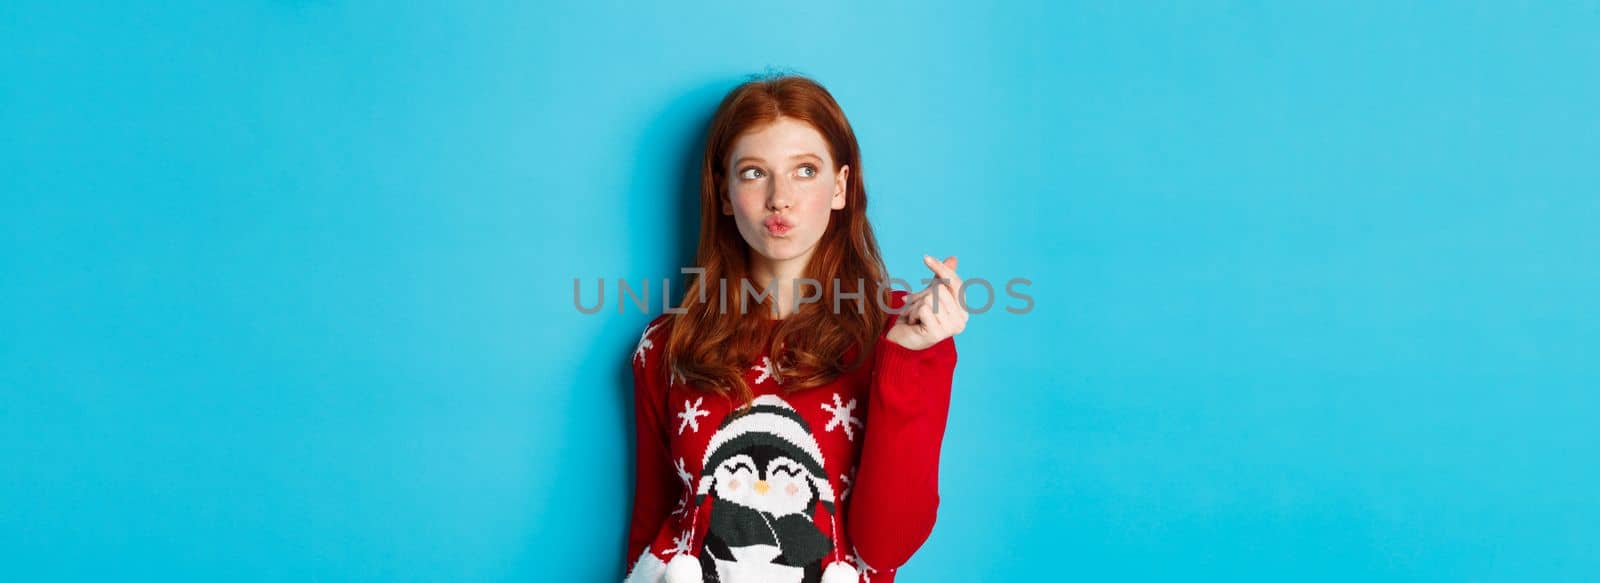 Winter holidays and Christmas Eve concept. Lovely redhead woman in xmas sweater, showing heart sign and thinking, looking upper left corner at logo, blue background.